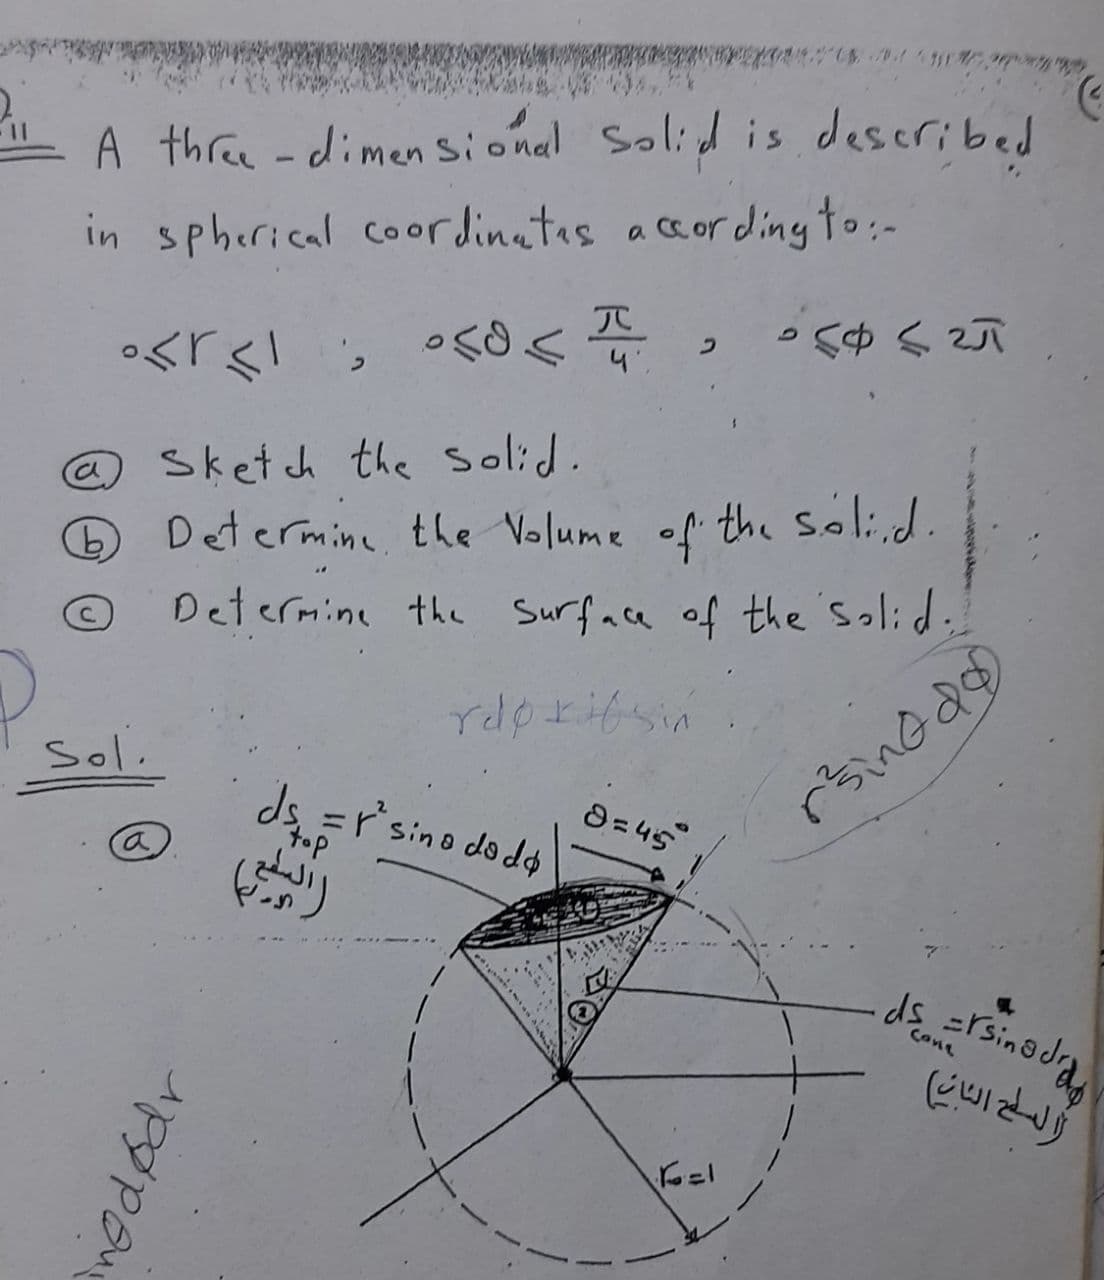 A three -dimen sional Solid is described
acordingto:-
in spherical coordinatas
う
。<「く! s<
@Sketch the solid.
Determine, the Volume of" the Soli,d.
Determine the Surface of the'Solid,
Ca,
rdpritsin
Sol.
8= 45
ds =r'sino dodo
top
Cone
